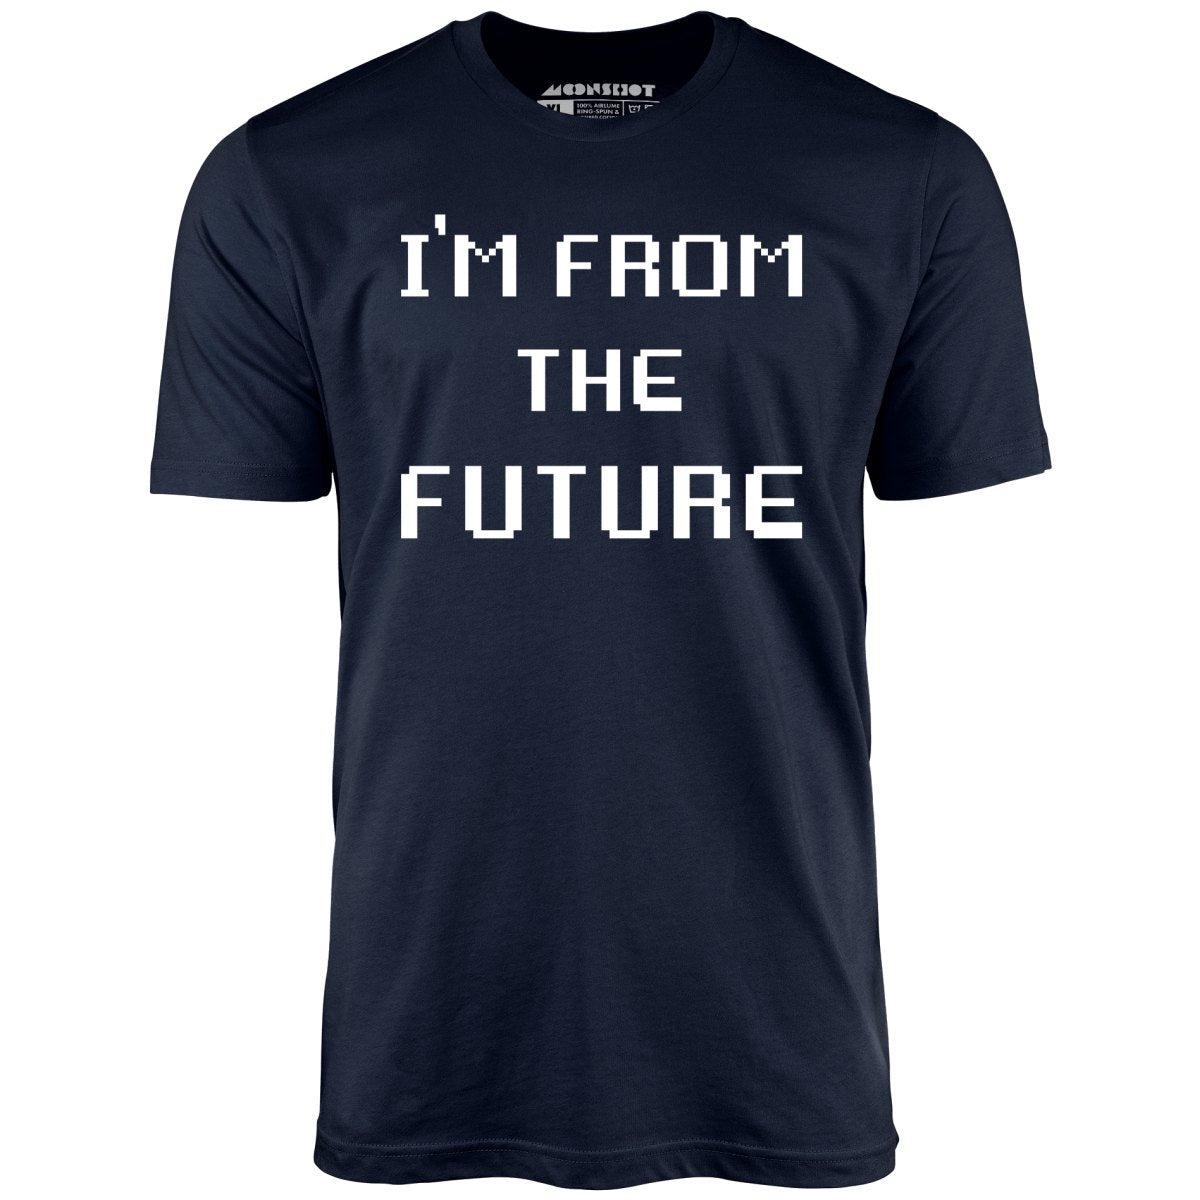 I'm From The Future - Unisex T-Shirt